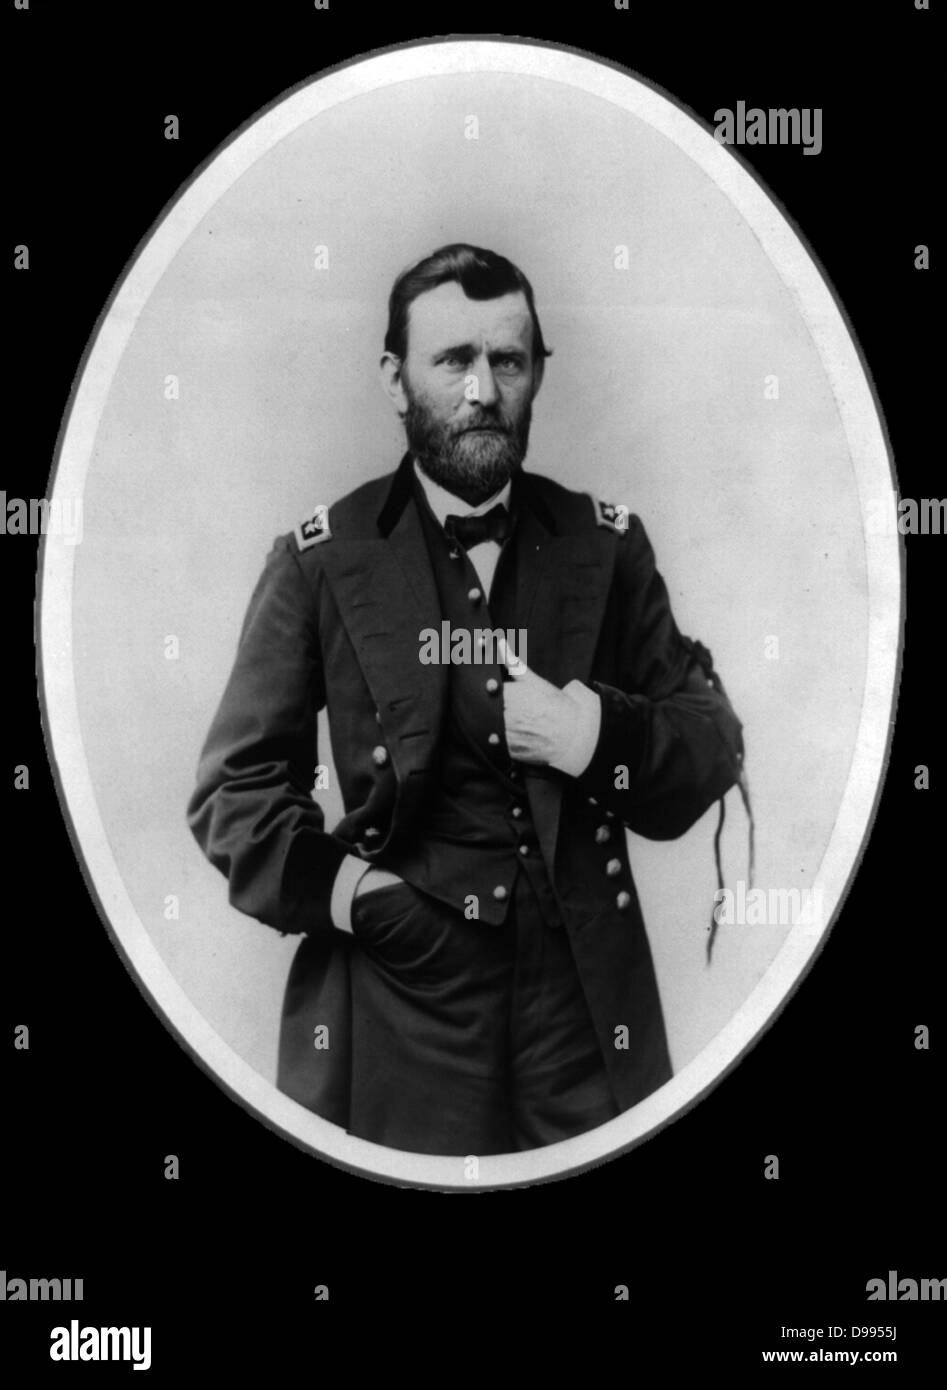 Ulysses S Grant (1822-1885) 18th President of the United States, 1869-1877. During the American Civil War 1861-1865 he was General-in-Chief of the Union armies. Here in the uniform of Lieutenant-General. Three-quarter portrait standing. Stock Photo